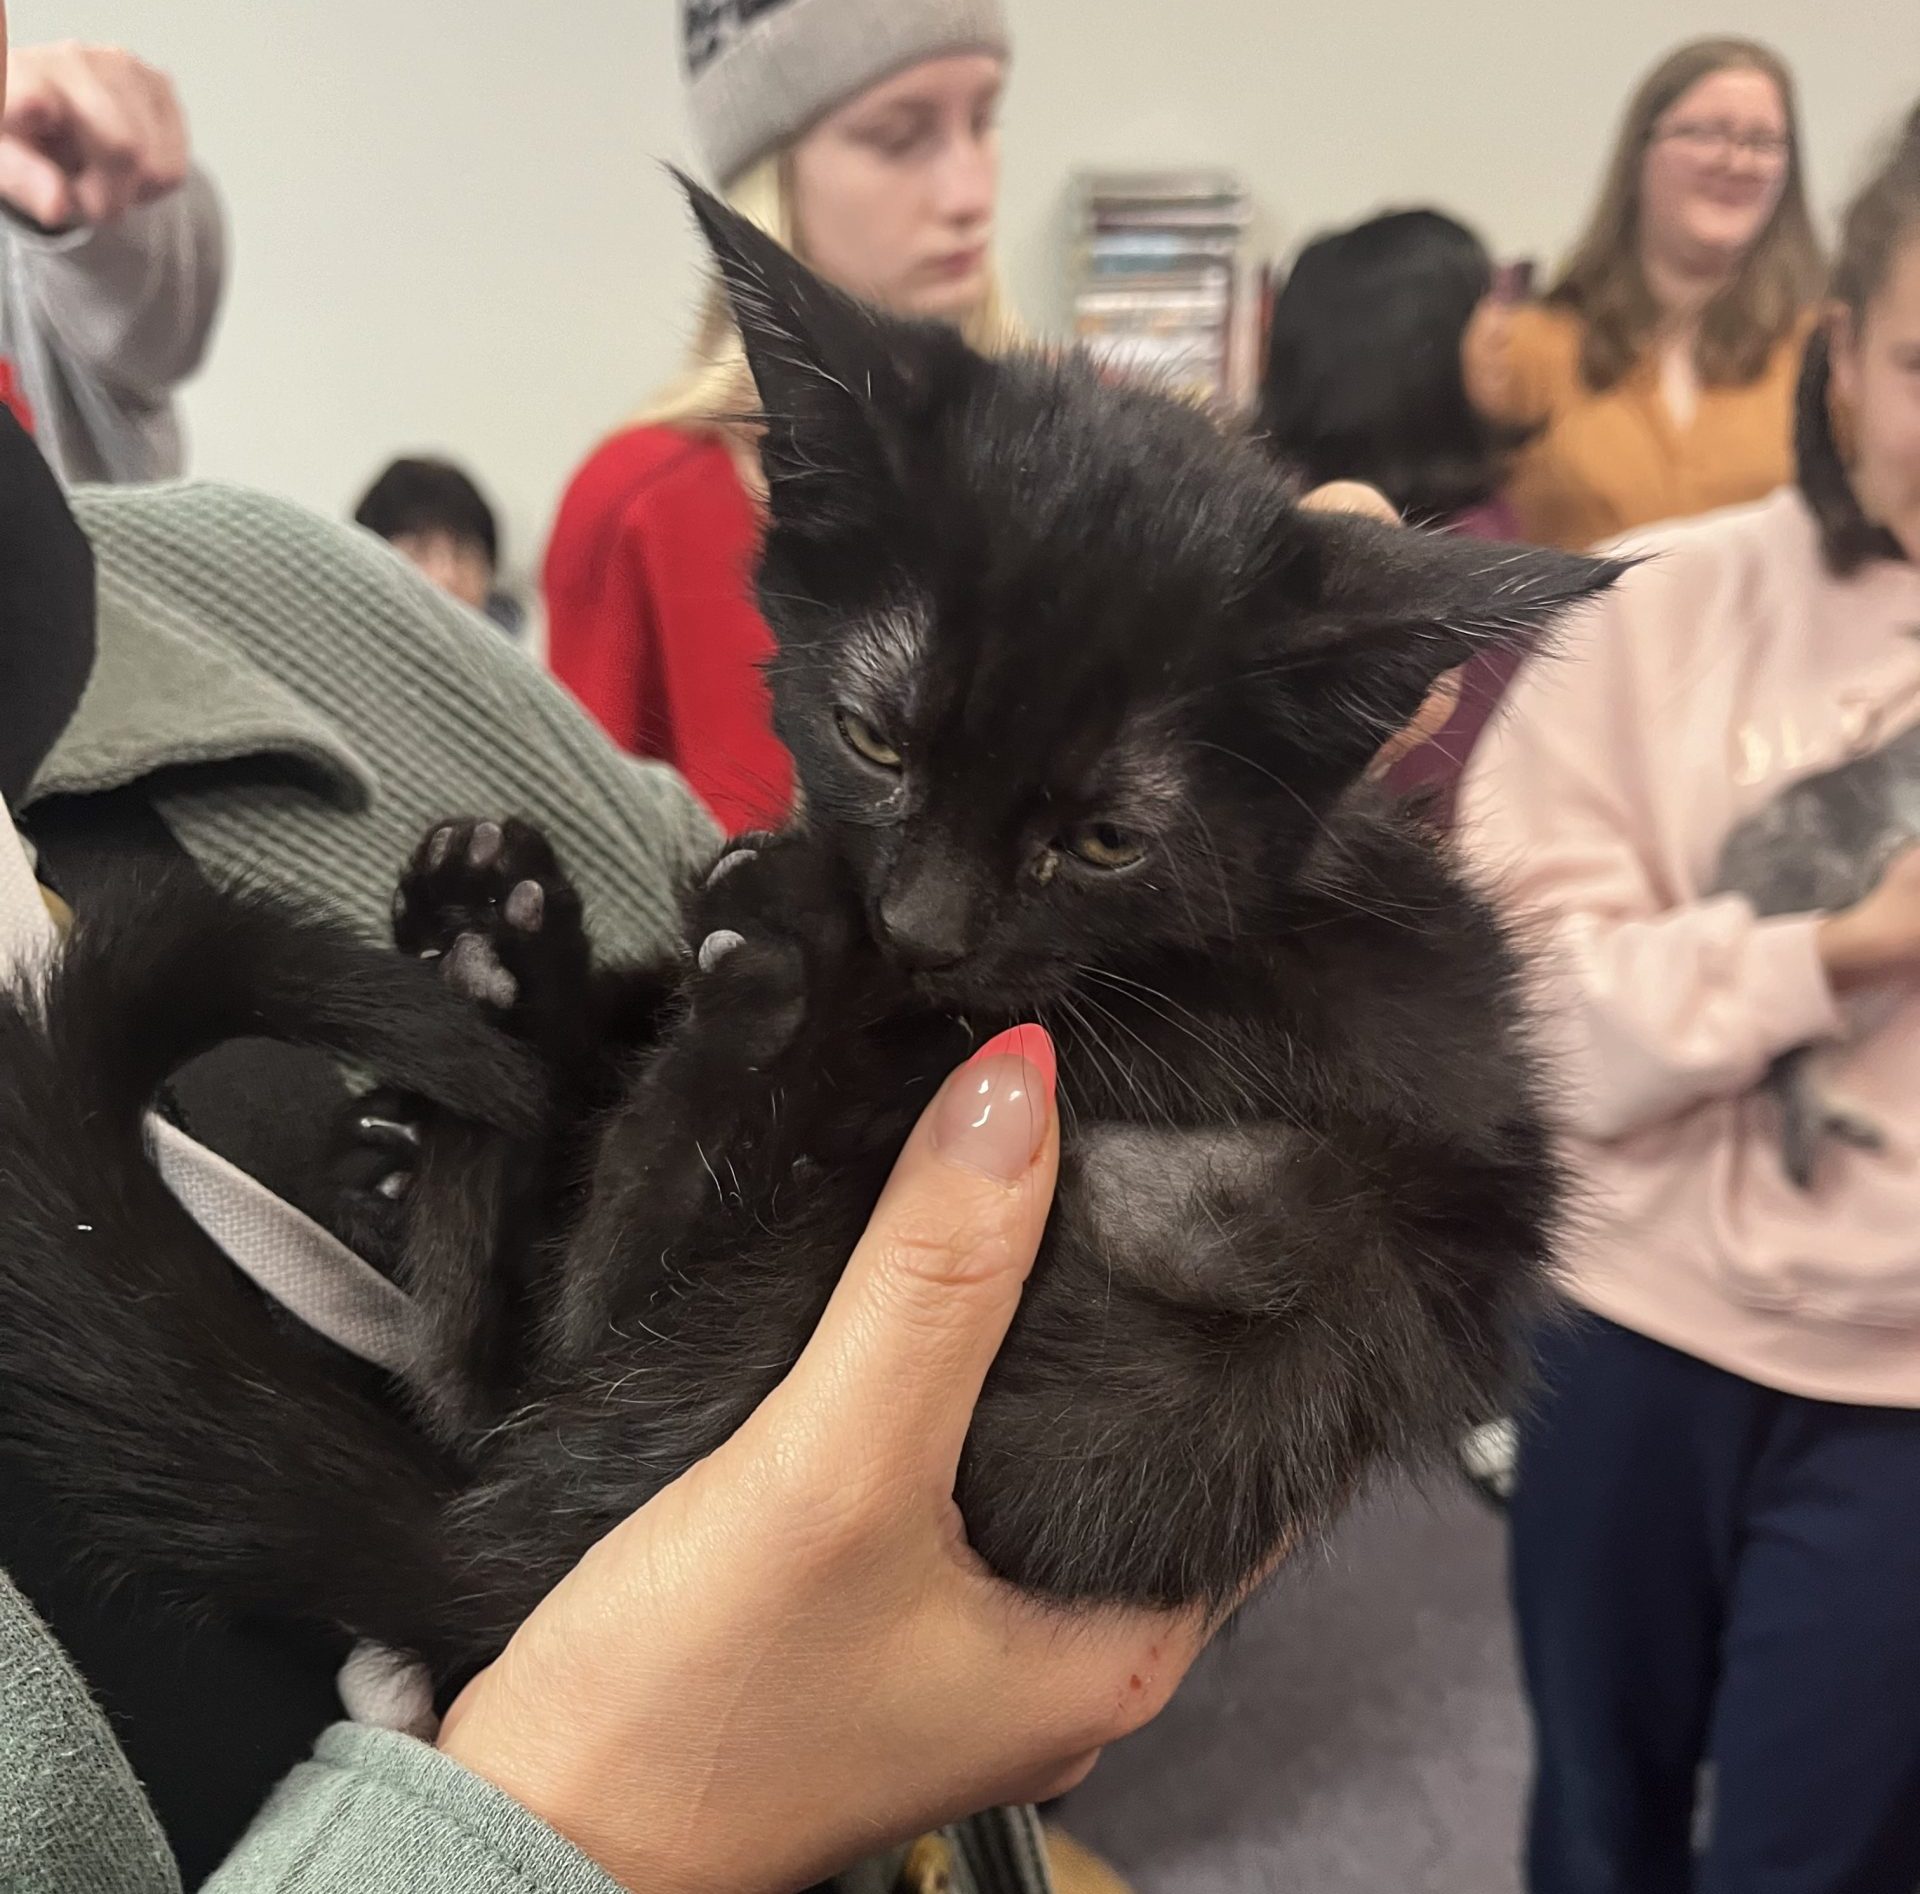 At the Gretna Public Library, Abbie, one of the kittens up for adoption through the Nebraska Humane Society, is cuddled by her potential new owner. The Gretna Public Library hosted the Kitty Caffe event in conjunction with the NHS and The Beanery.  